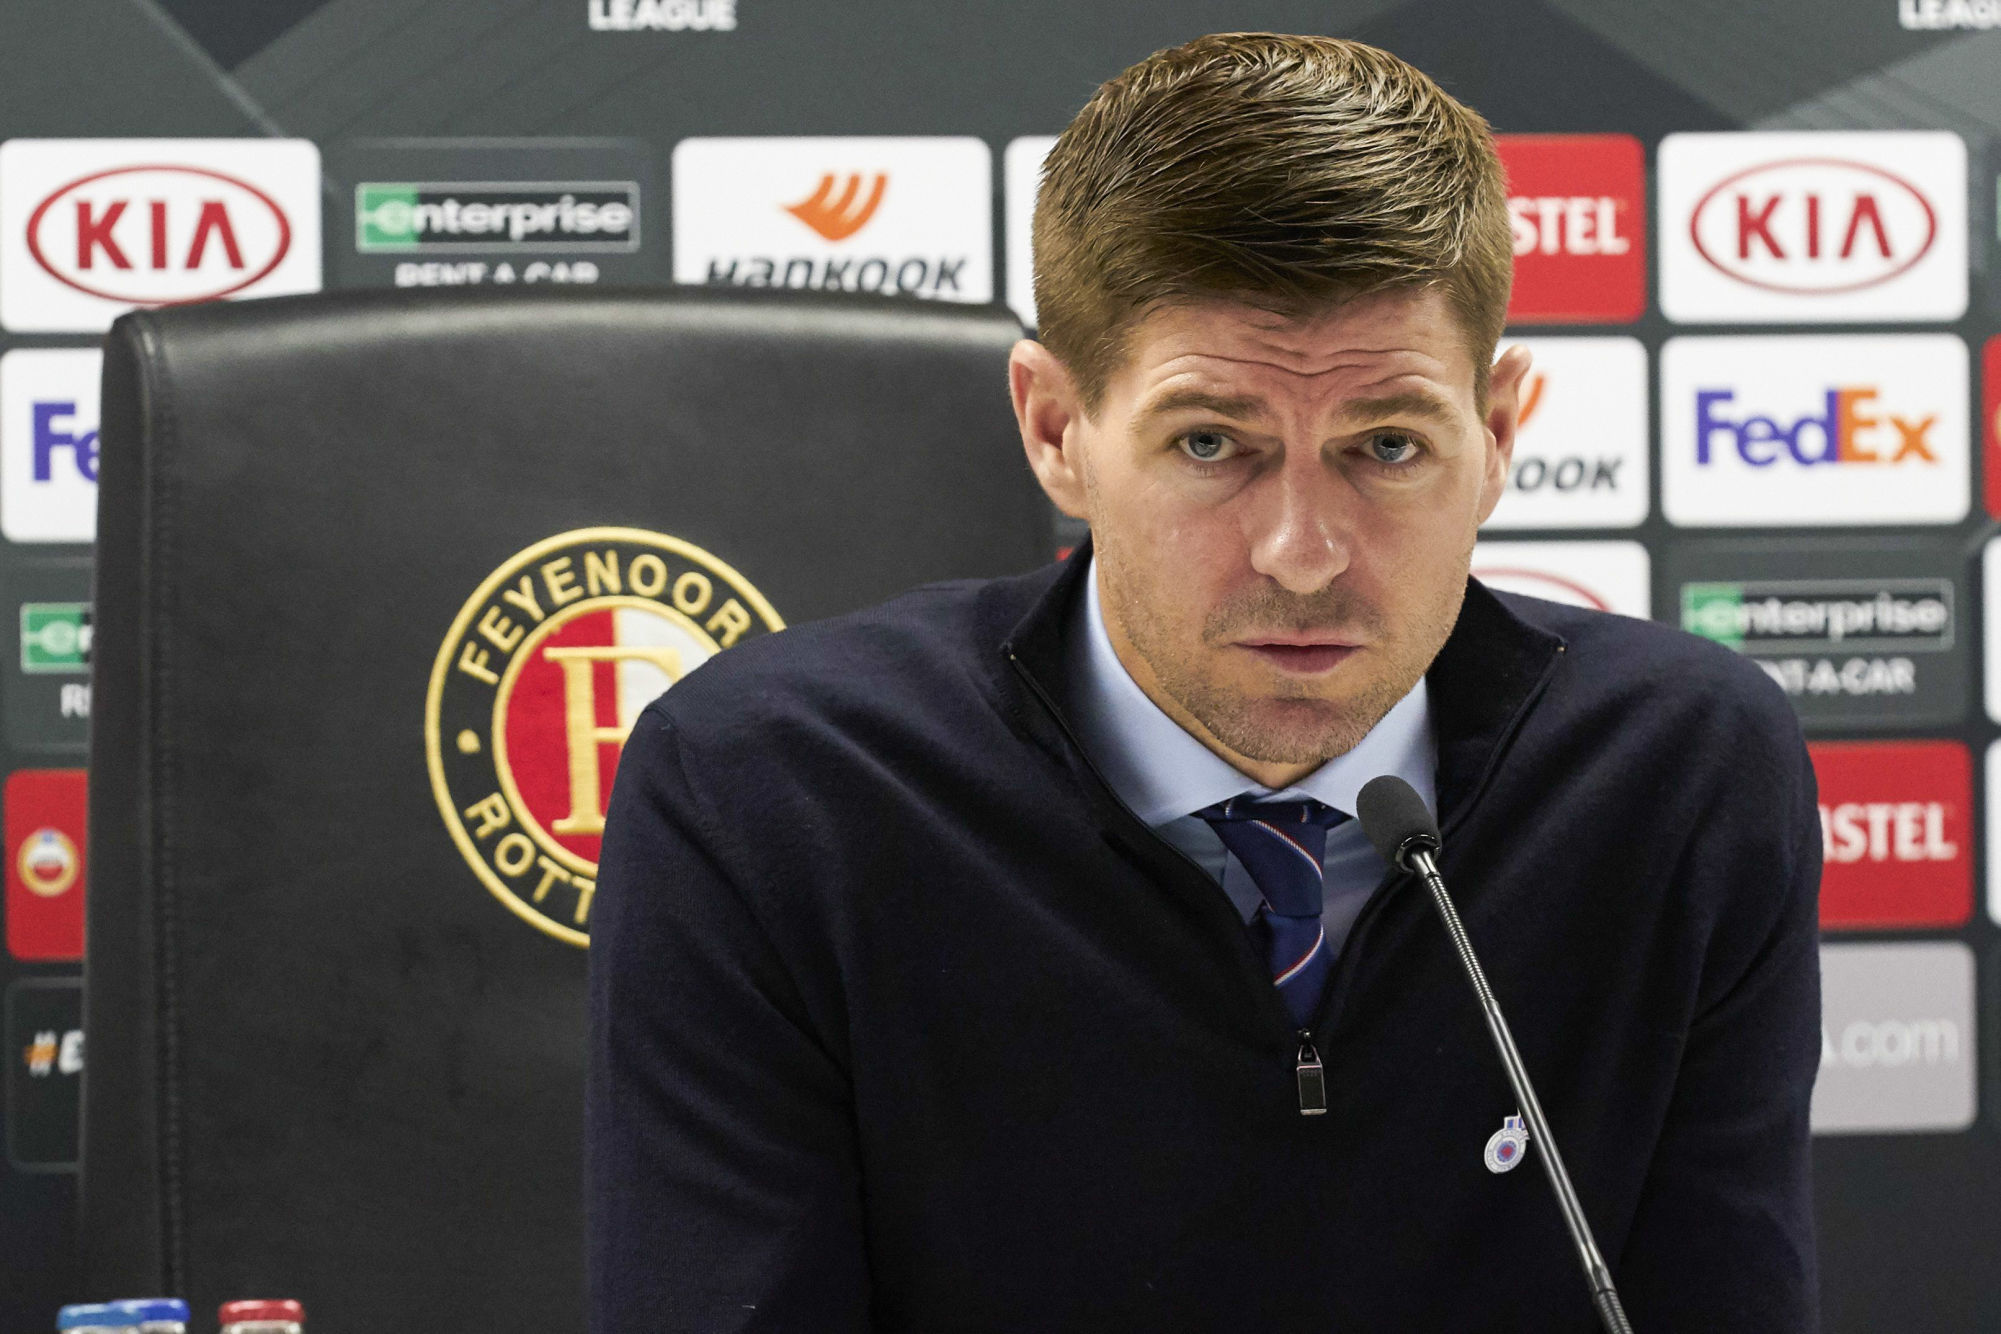 coach Steven Gerrard of Rangers FC during the UEFA Europa League group G match between Feyenoord Rotterdam and Rangers FC at De Kuip on November 28, 2019 in Rotterdam, The Netherlands 

Photo by Icon Sport - Steven GERRARD - De Kuip - Rotterdam (Pays Bas)